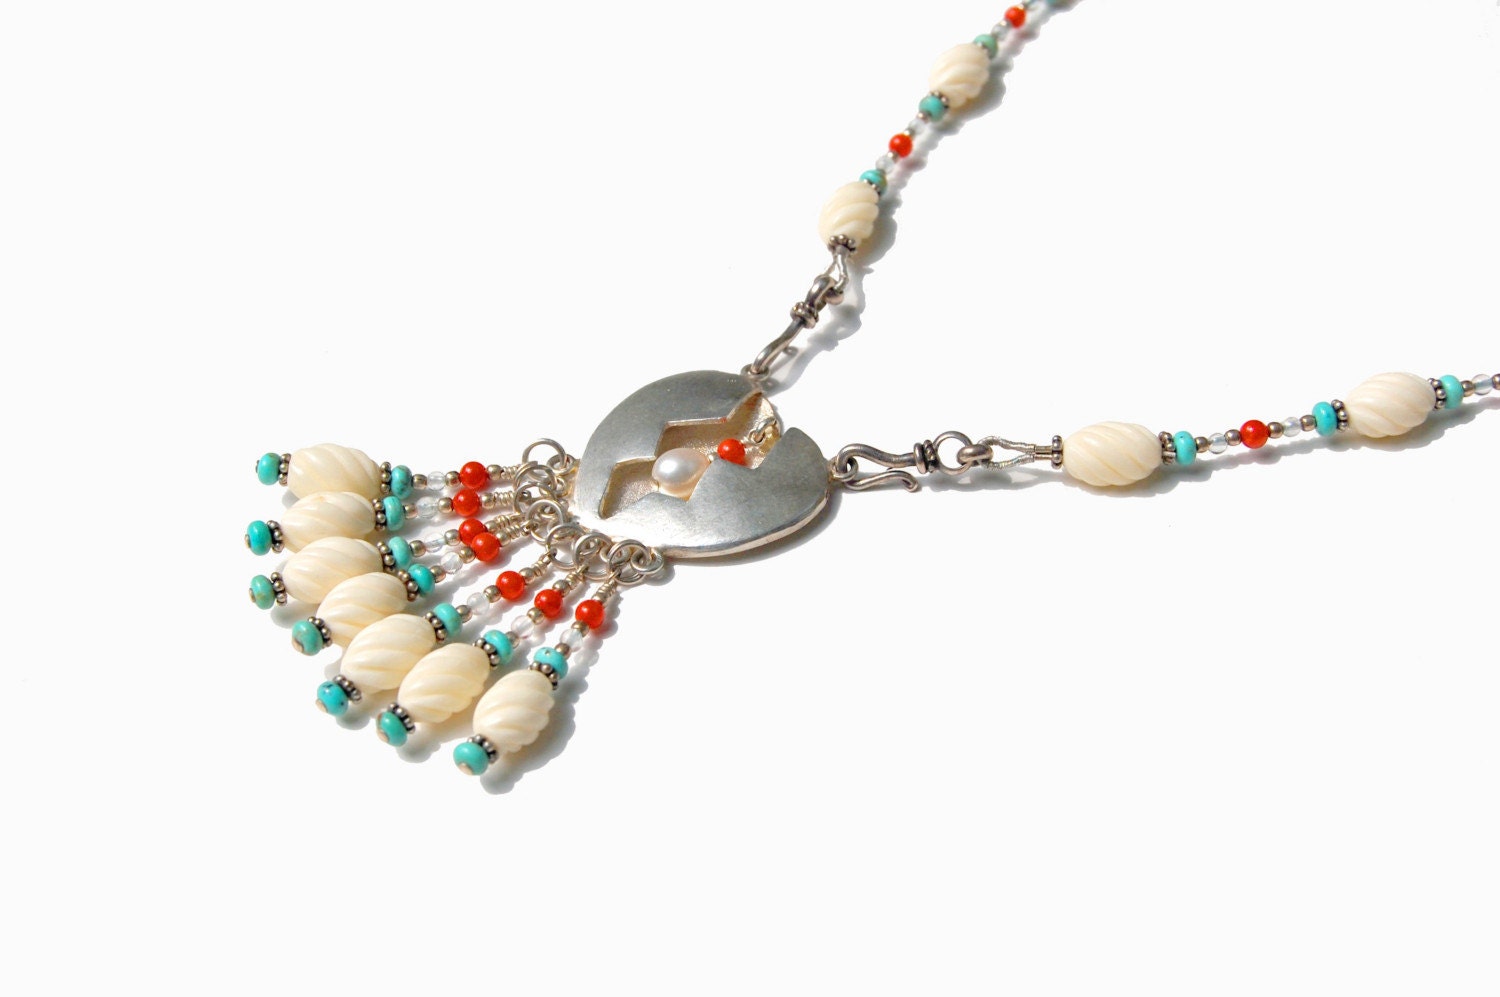 Sterling Casted Hollowform Broken Heart Necklace with Turquoise, Bone, Coral, and Aquamarine